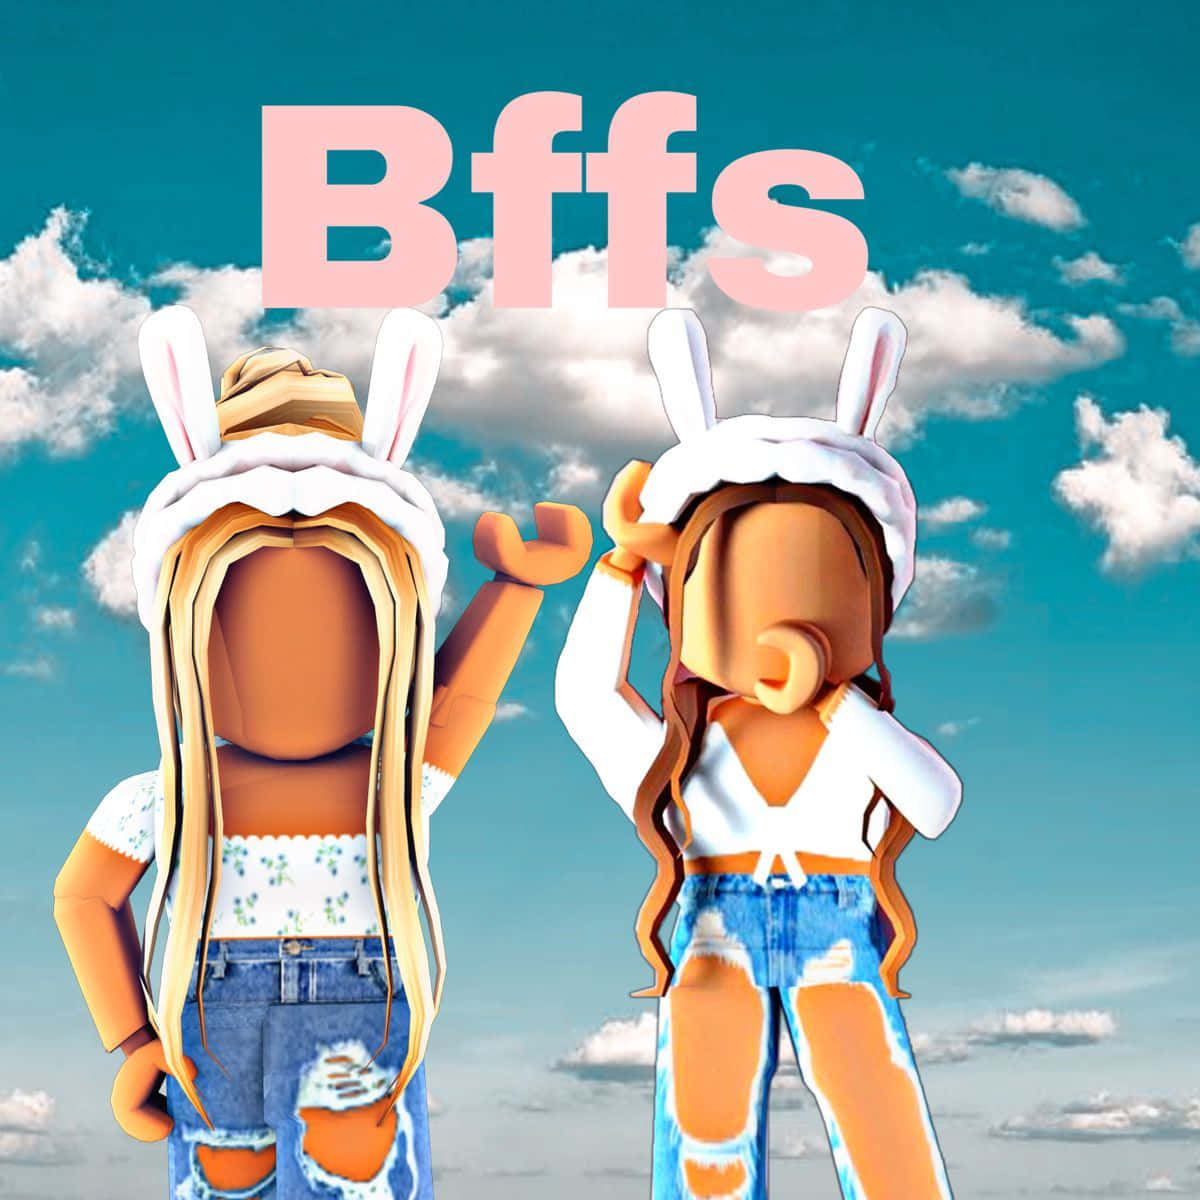 BFF's Playing Together on Roblox!